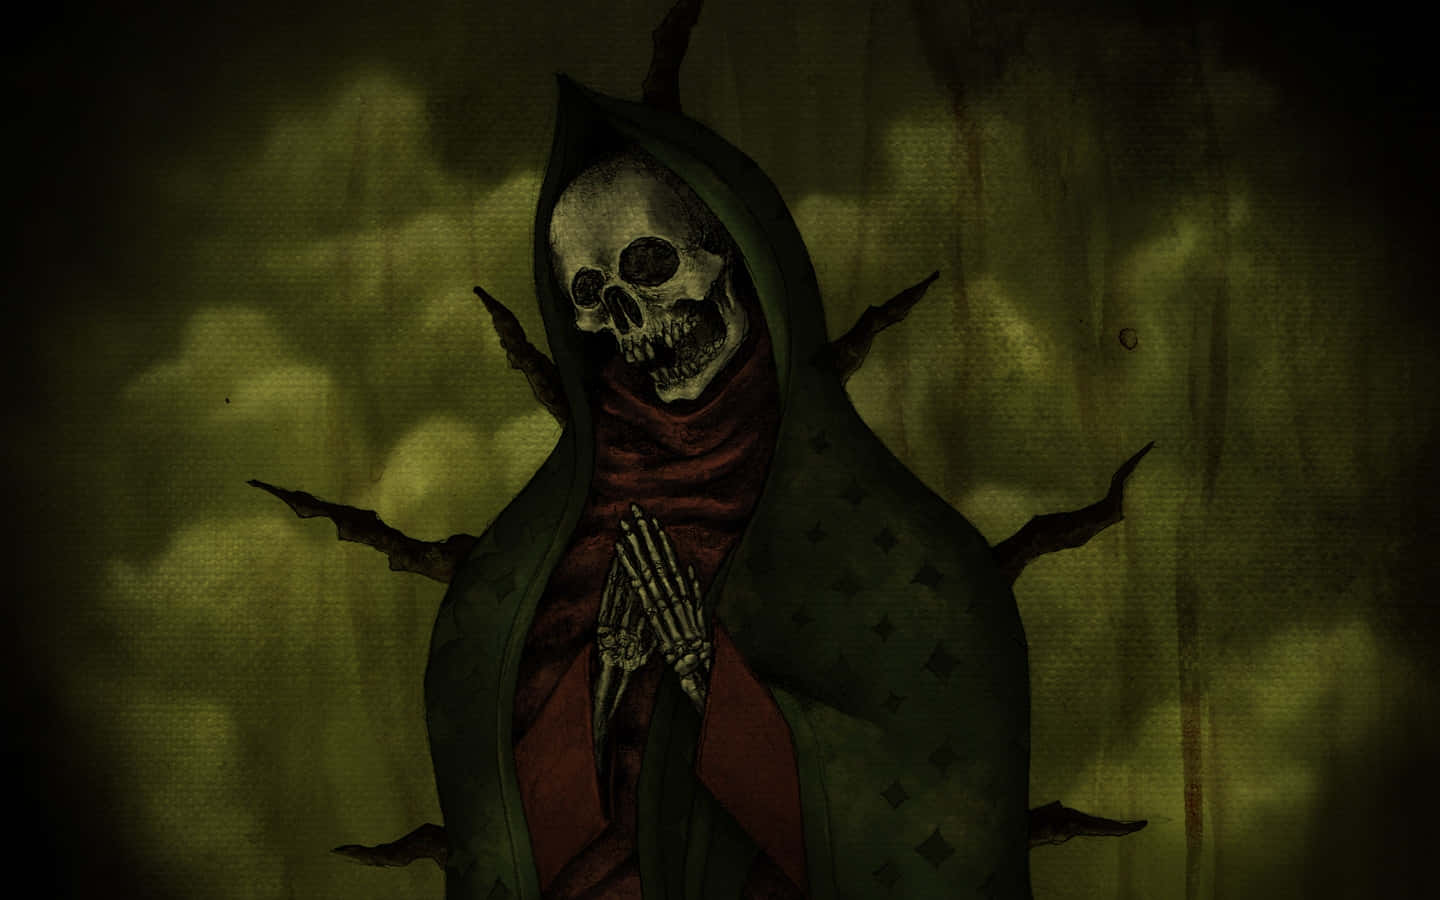 A Skeleton In A Green Cloak With A Skull